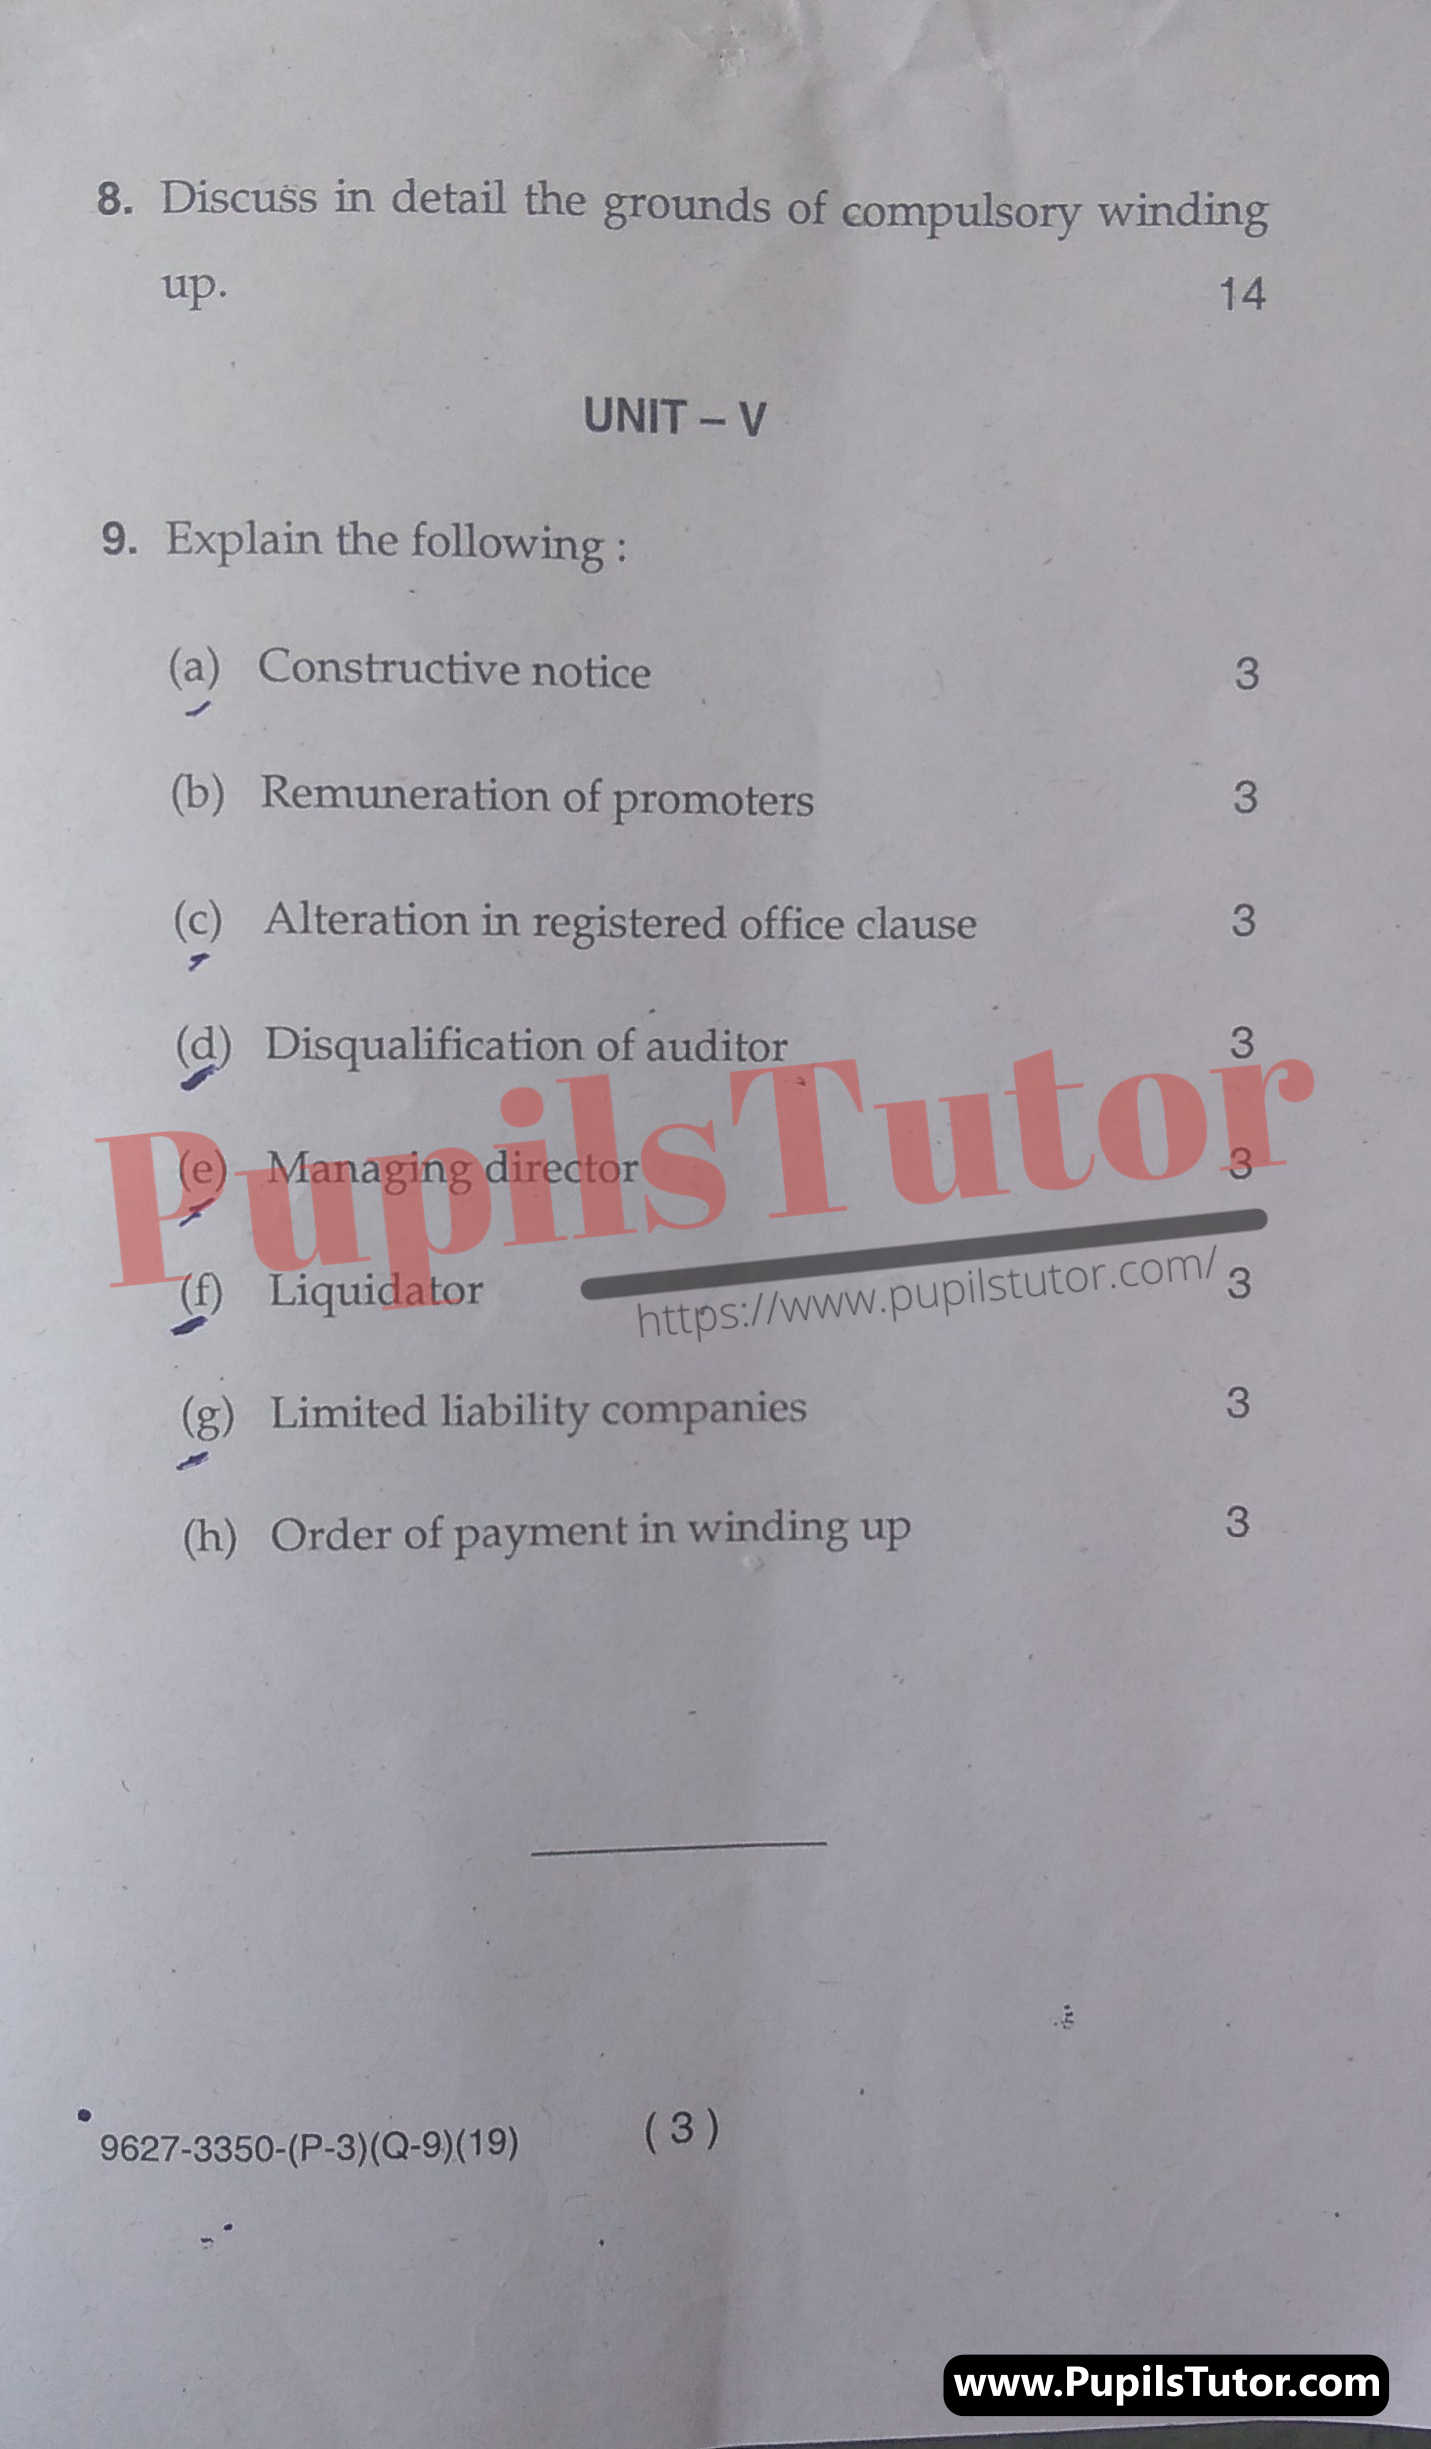 Free Download PDF Of M.D. University B.A. LL.B. Fifth Semester Latest Question Paper For Company Law Subject (Page 3) - https://www.pupilstutor.com